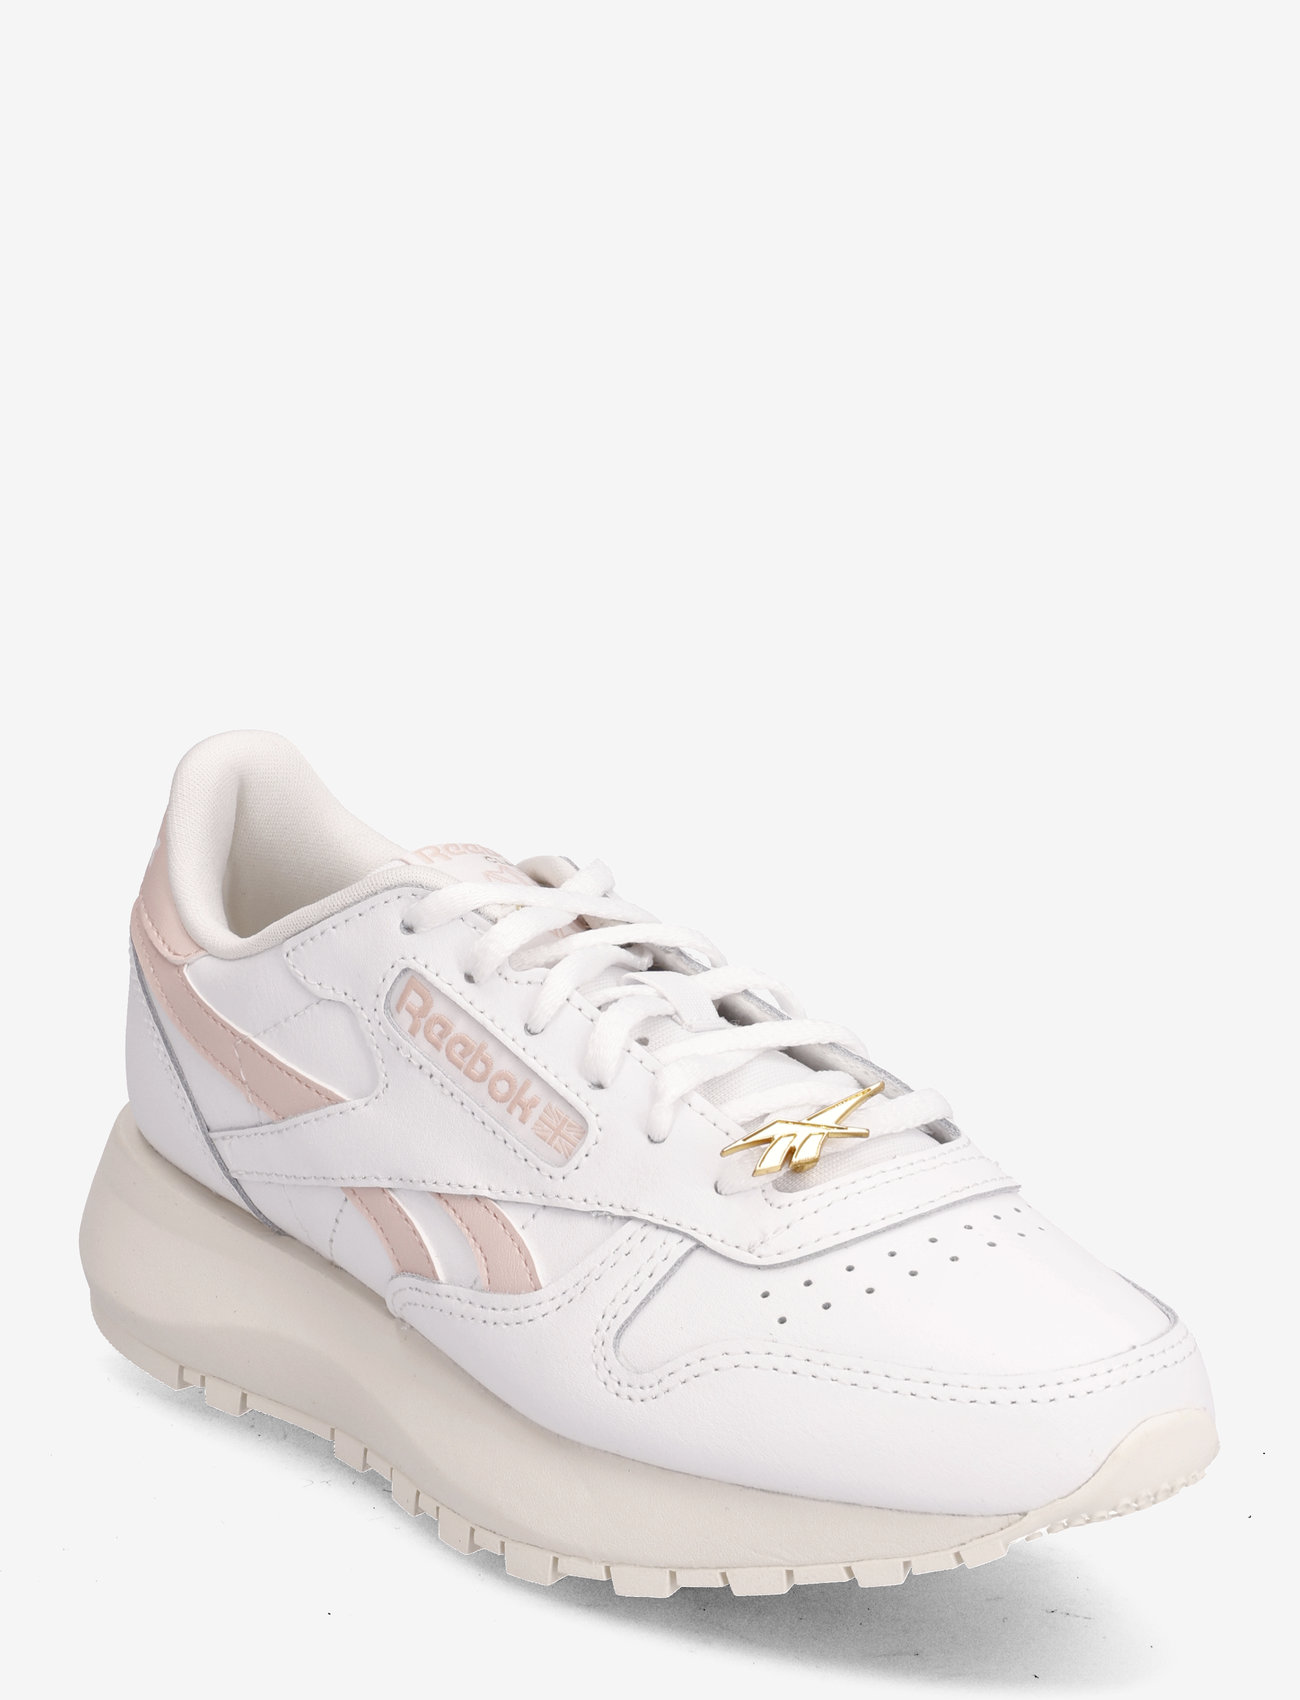 Reebok Classics - CLASSIC LEATHER SP - low top sneakers - ftwwht/pospin/chalk - 0